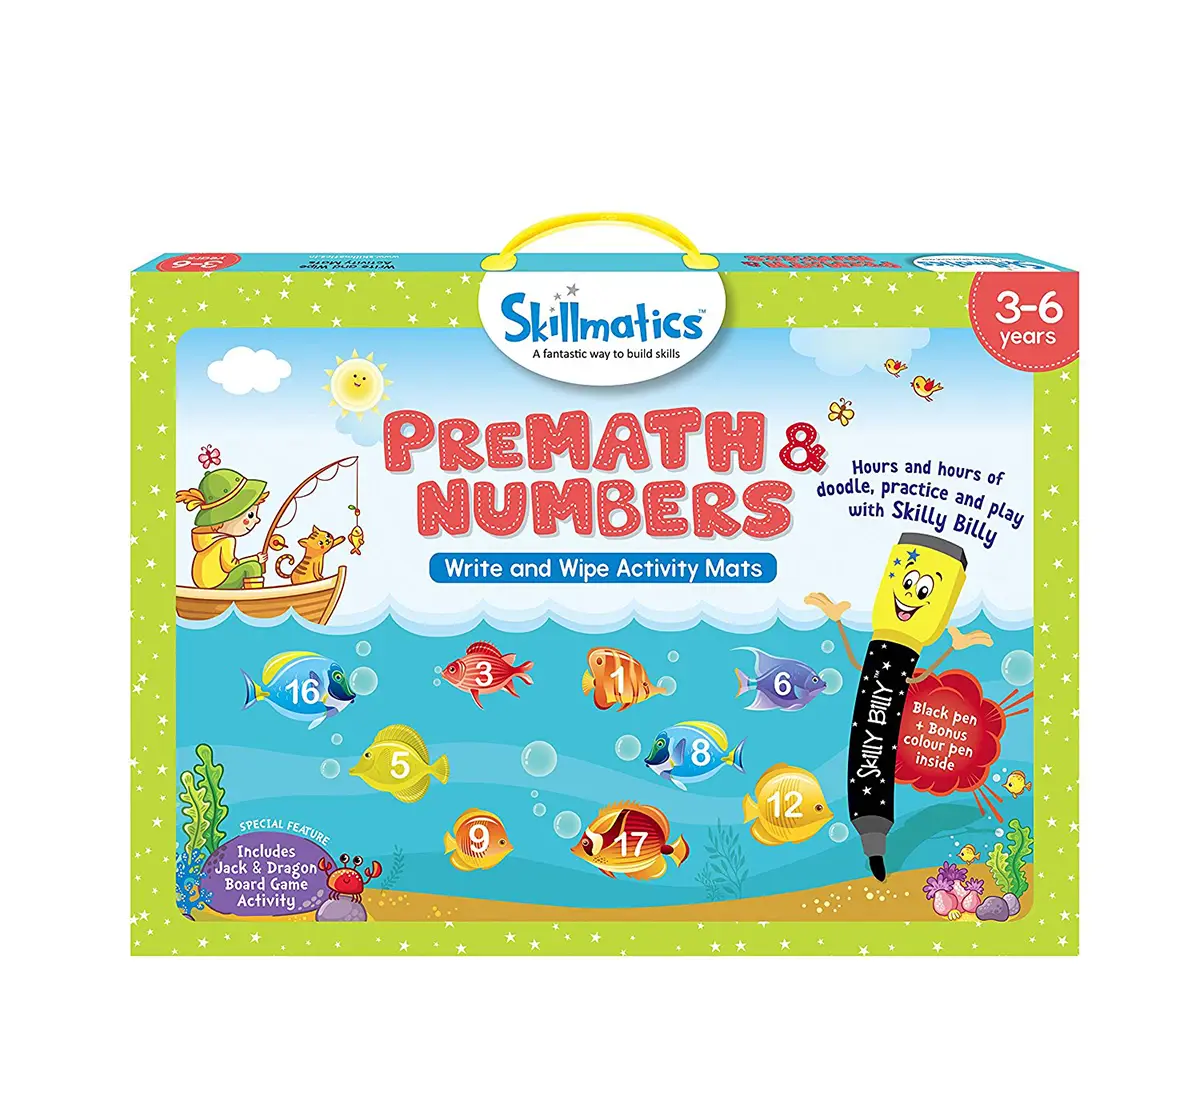 Skillmatics Educational Game Premath And Numbers, 3-6 Years, Multicolor Games for Kids age 3Y+ 